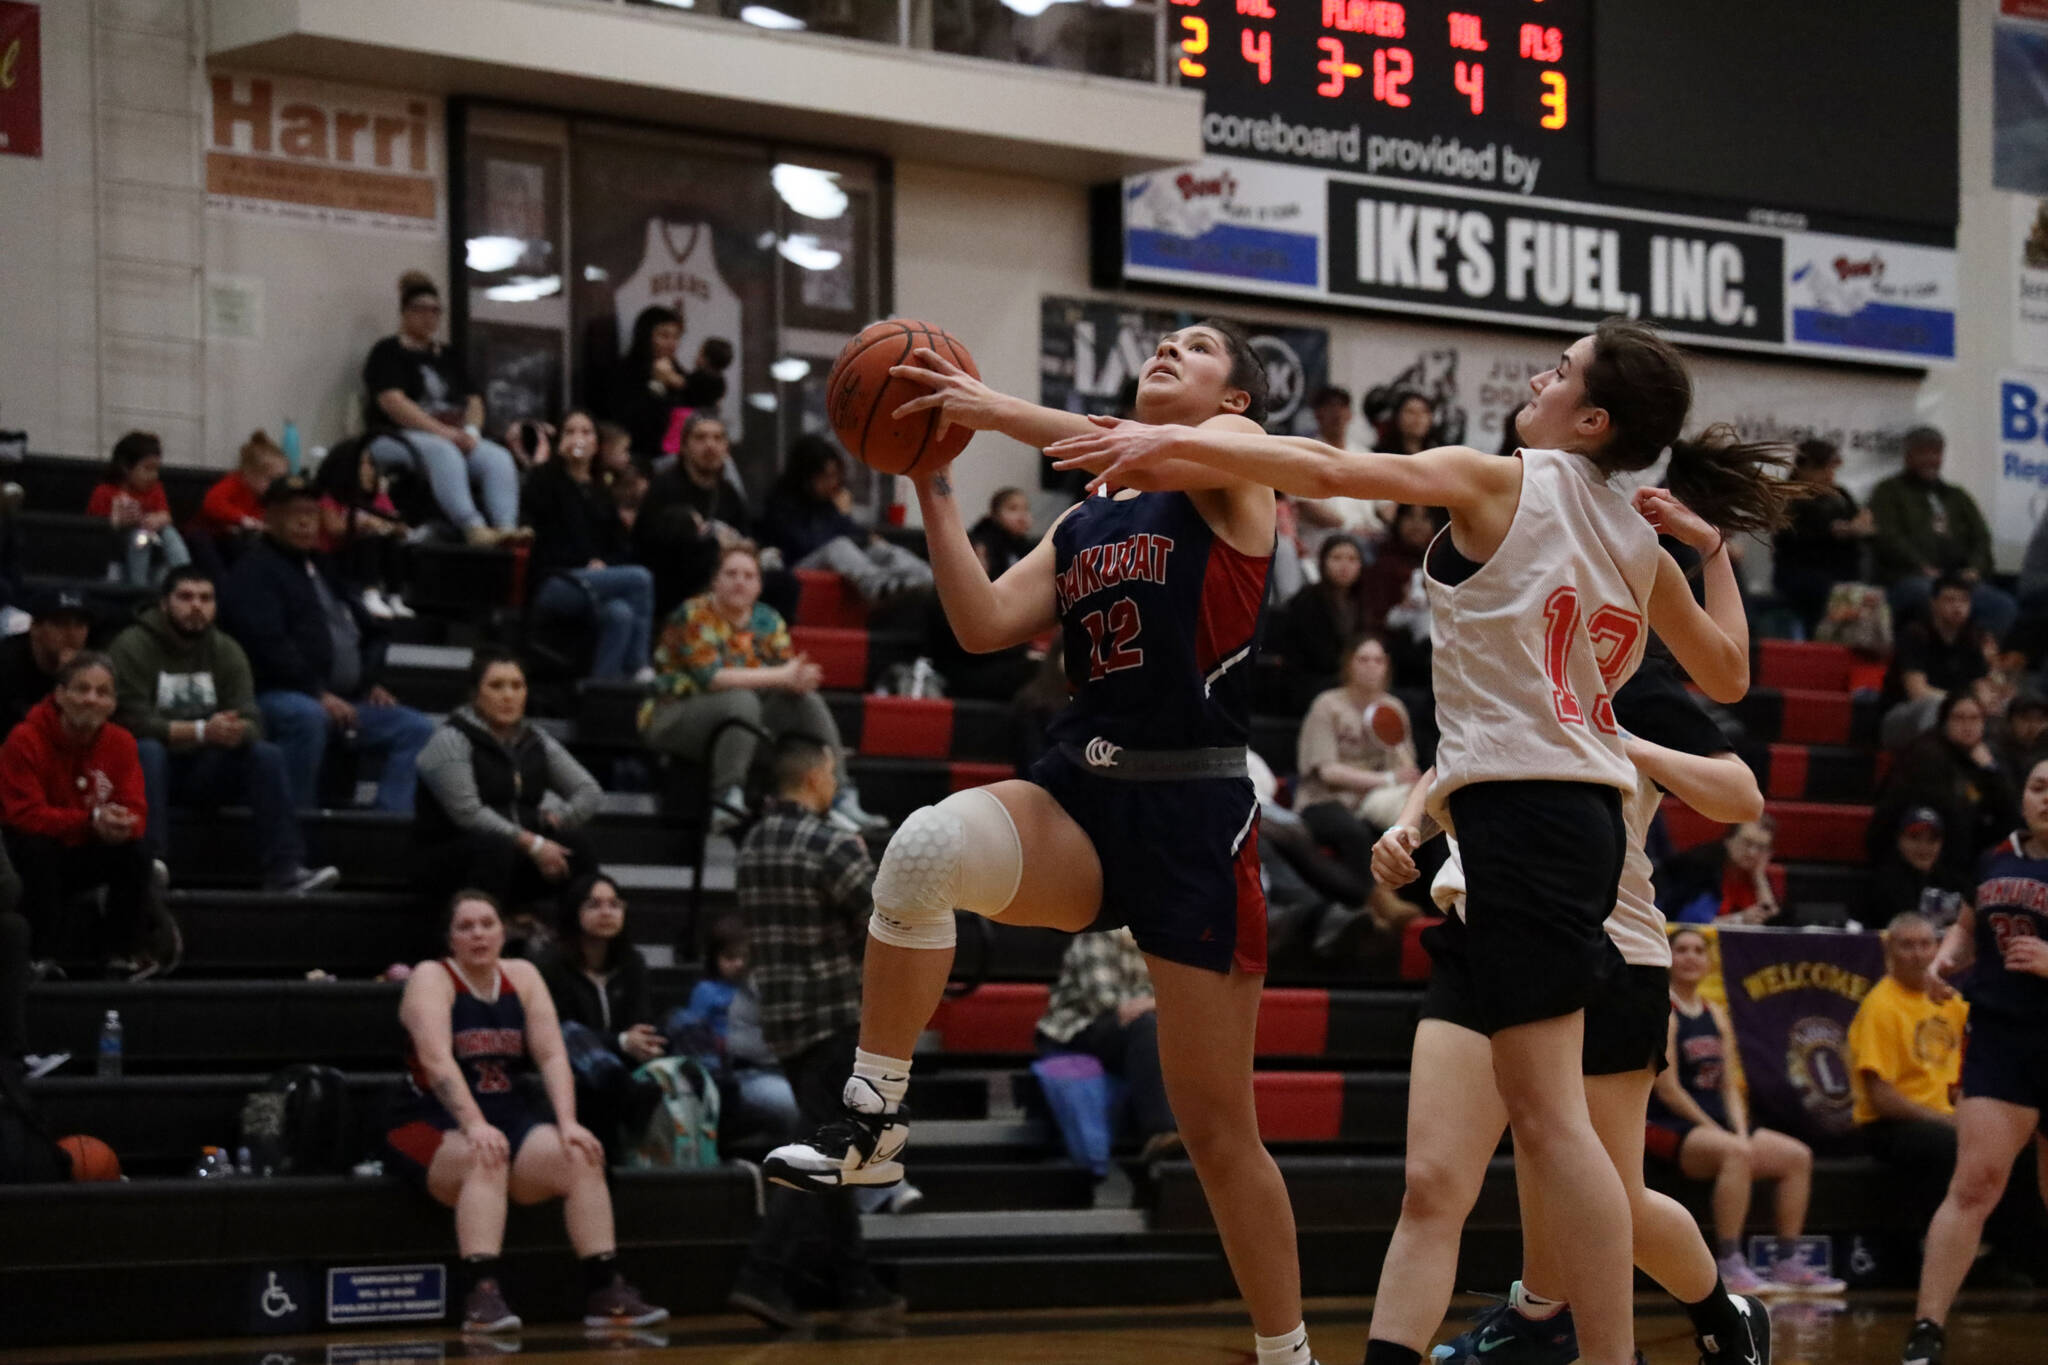 Yakutat’s Trinity Jackson goes up for a shot Monday afternoon in a game against Kake during the Juneau Lions Club 74th Gold Medal Basketball Tournament at the Juneau-Douglas High School: Yadaa.at Kalé gymnasium. Yakutat prevailed against Kake 69-33. (Clarise Larson / Juneau Empire)